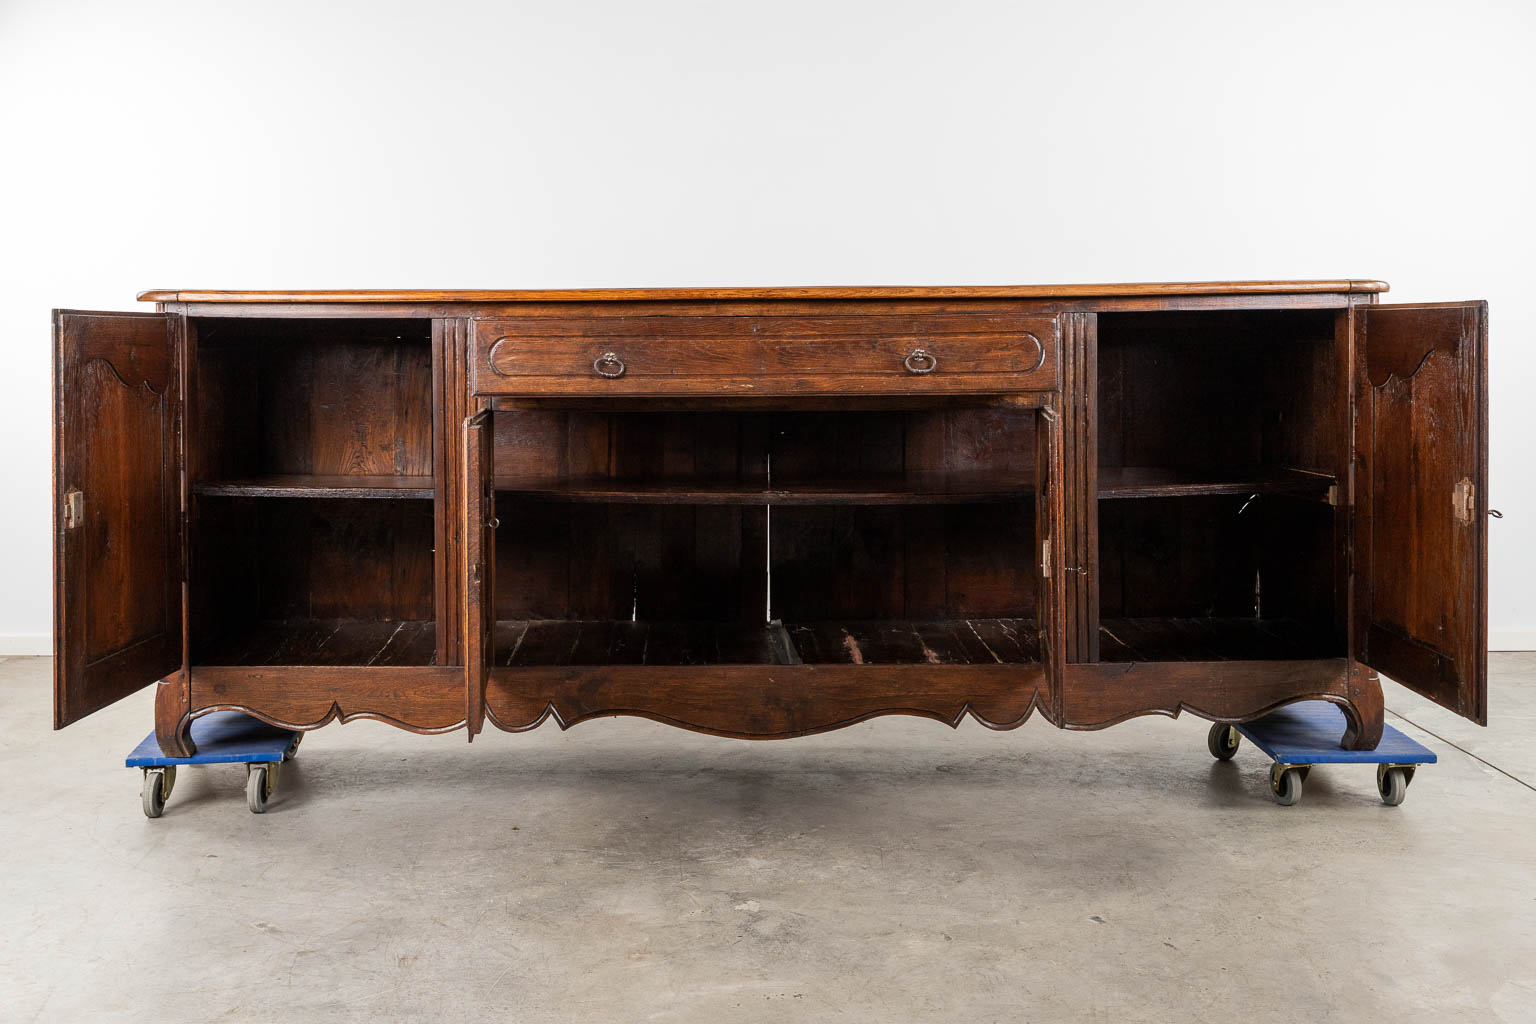 An antique sideboard with 4 doors and a drawer, 18th C. (D:64 x W:281 x H:105 cm)